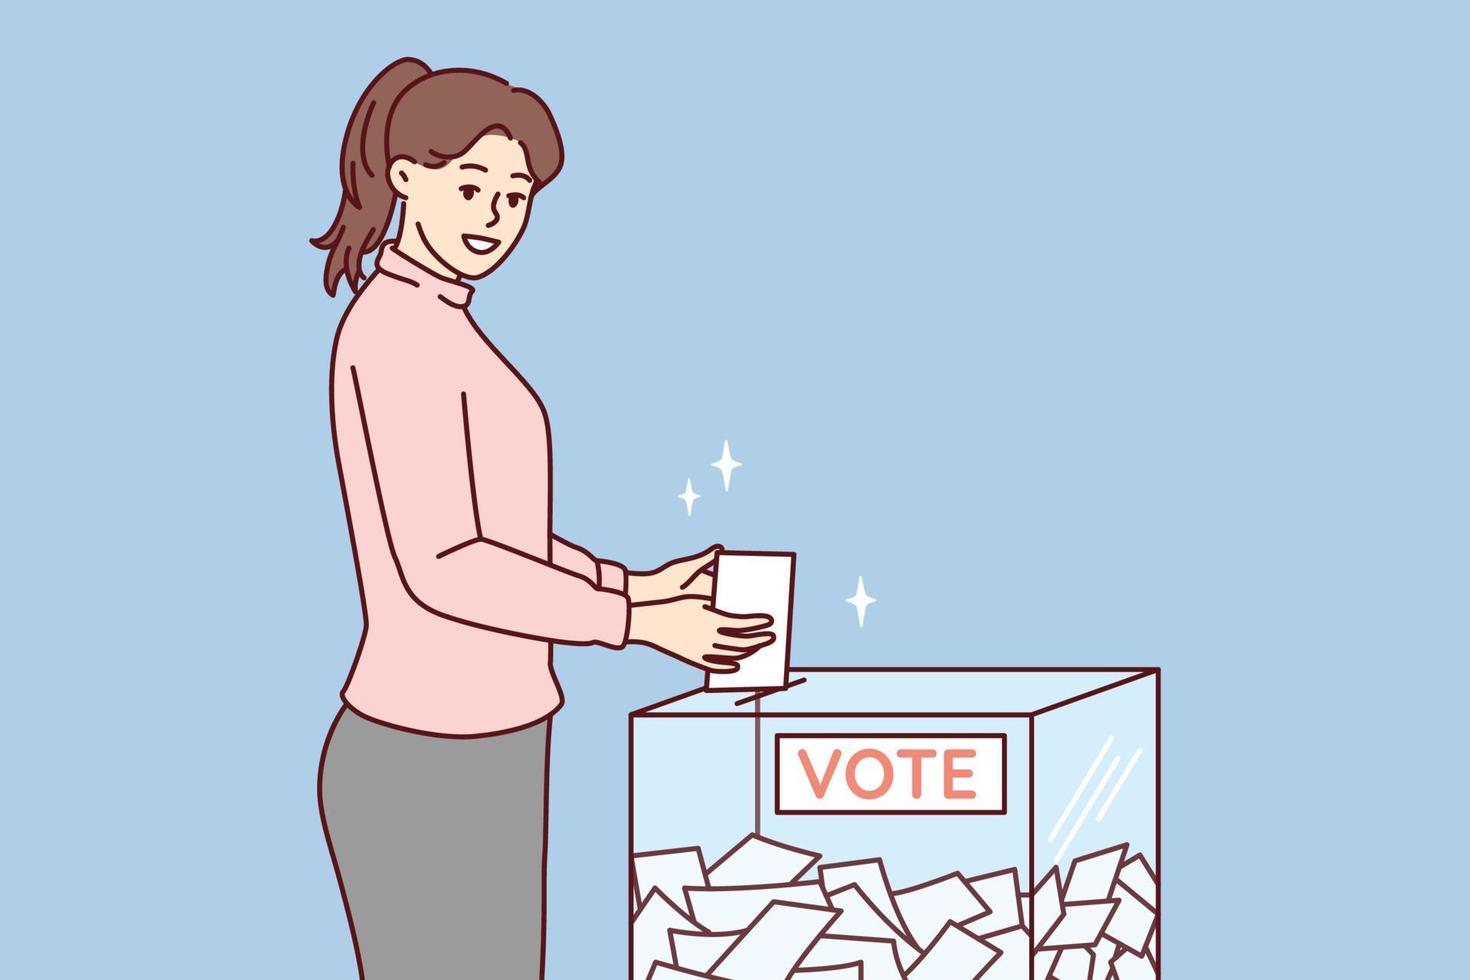 Woman throws ballot into glass box casting vote for presidential or congressional candidate. girl shows civil position by taking part in elections of political course of state. Flat vector design